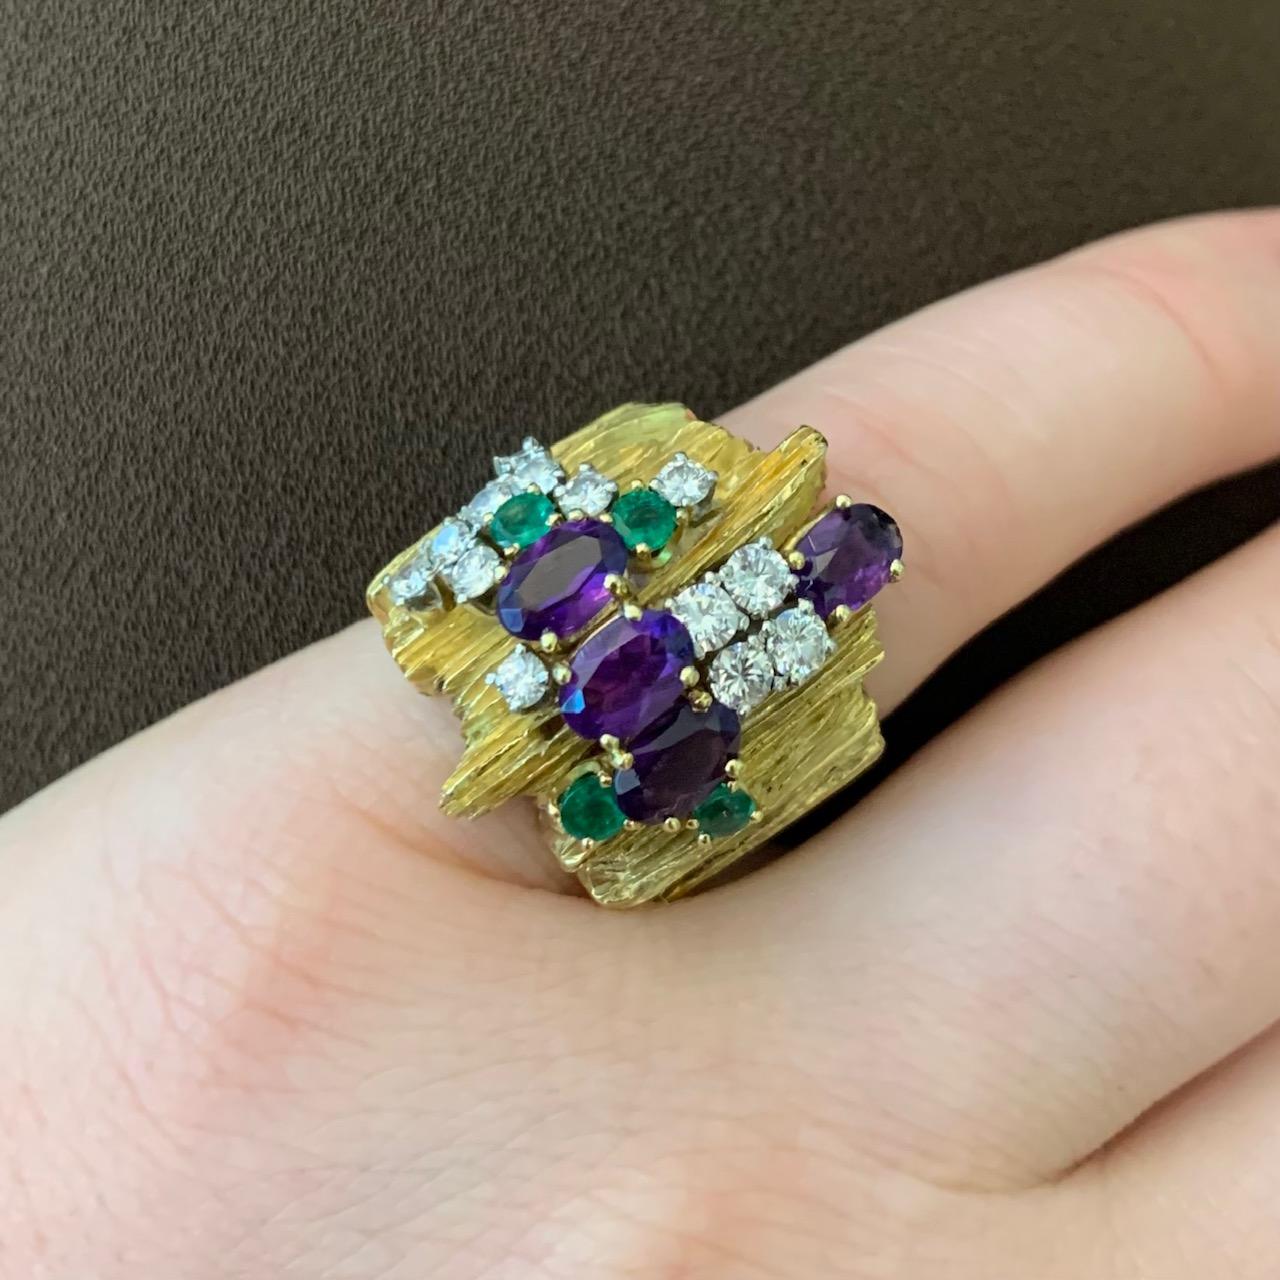 An amethyst, diamond, emerald and 18 karat textured gold ring, by Henry Dunay, c. 1970, United States. This ring is signed Dunay 18k. Size 5.  

This is an earlier ring by Dunay, luscious and sparkling. 

Henry Dunay won a Diamonds International